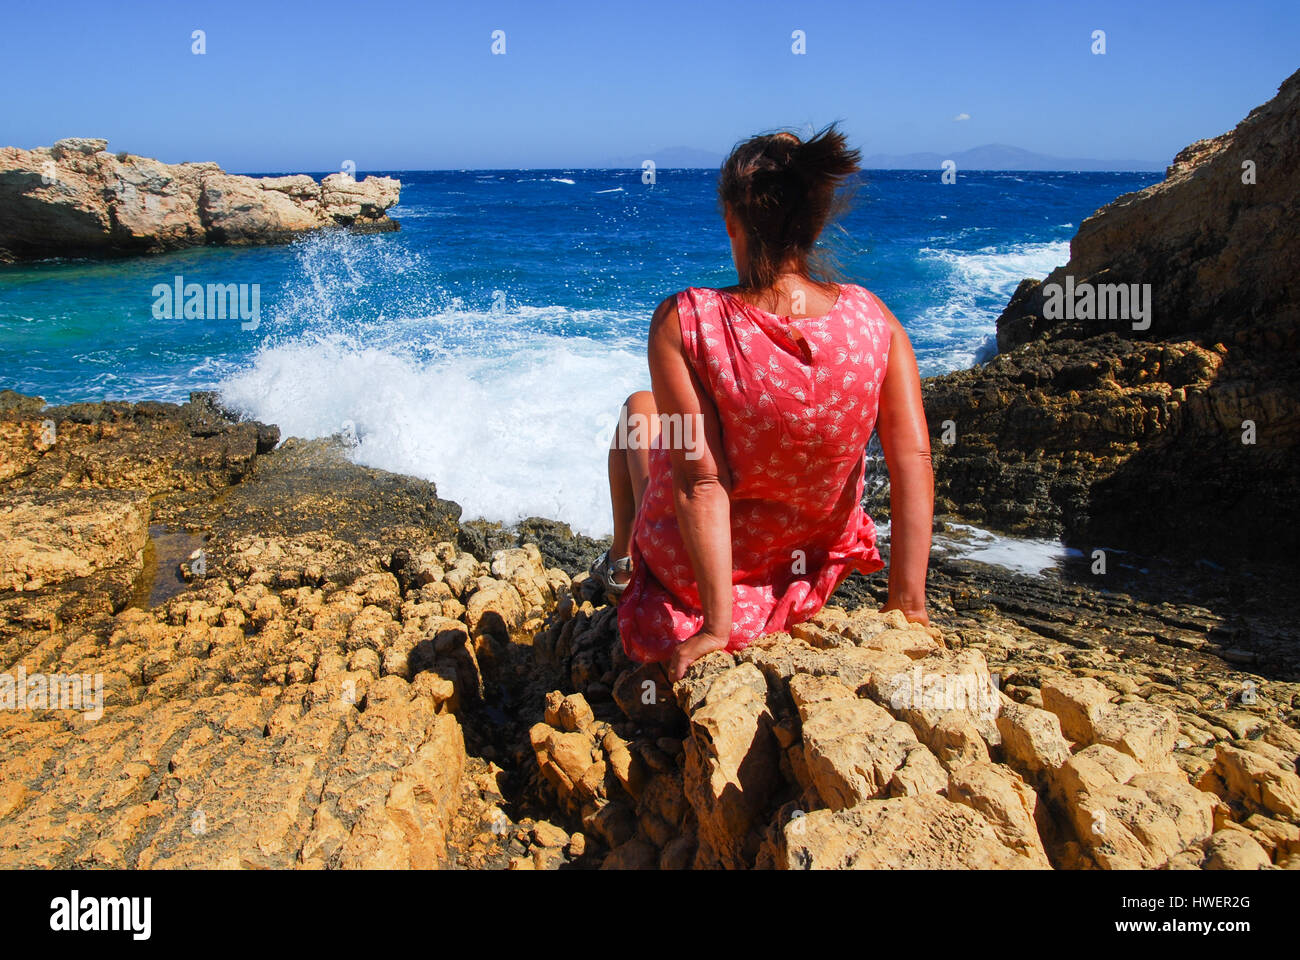 Woman leaning back on rocks facing the sea as waves splash. Stock Photo